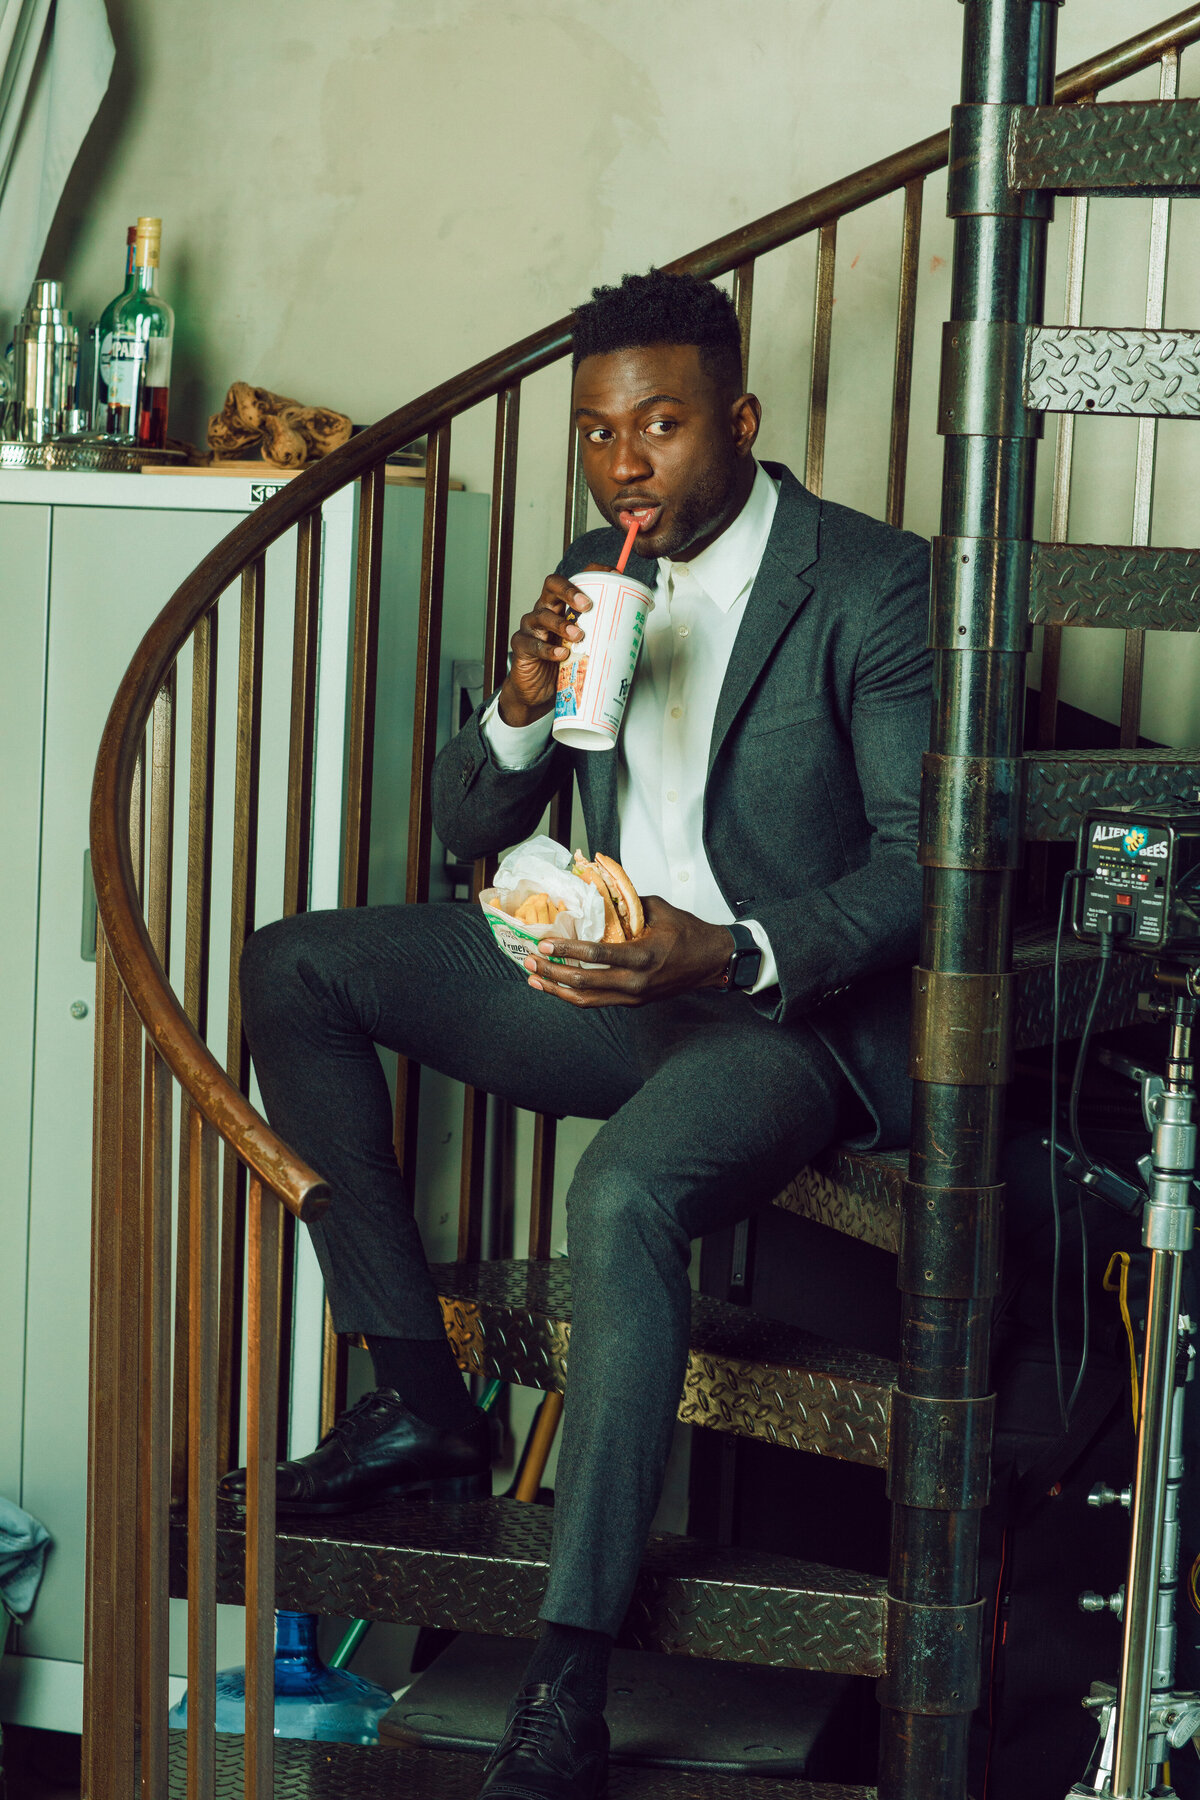 Portrait Photo Of Young Black Man In Suit Sipping a Drink Los Angeles